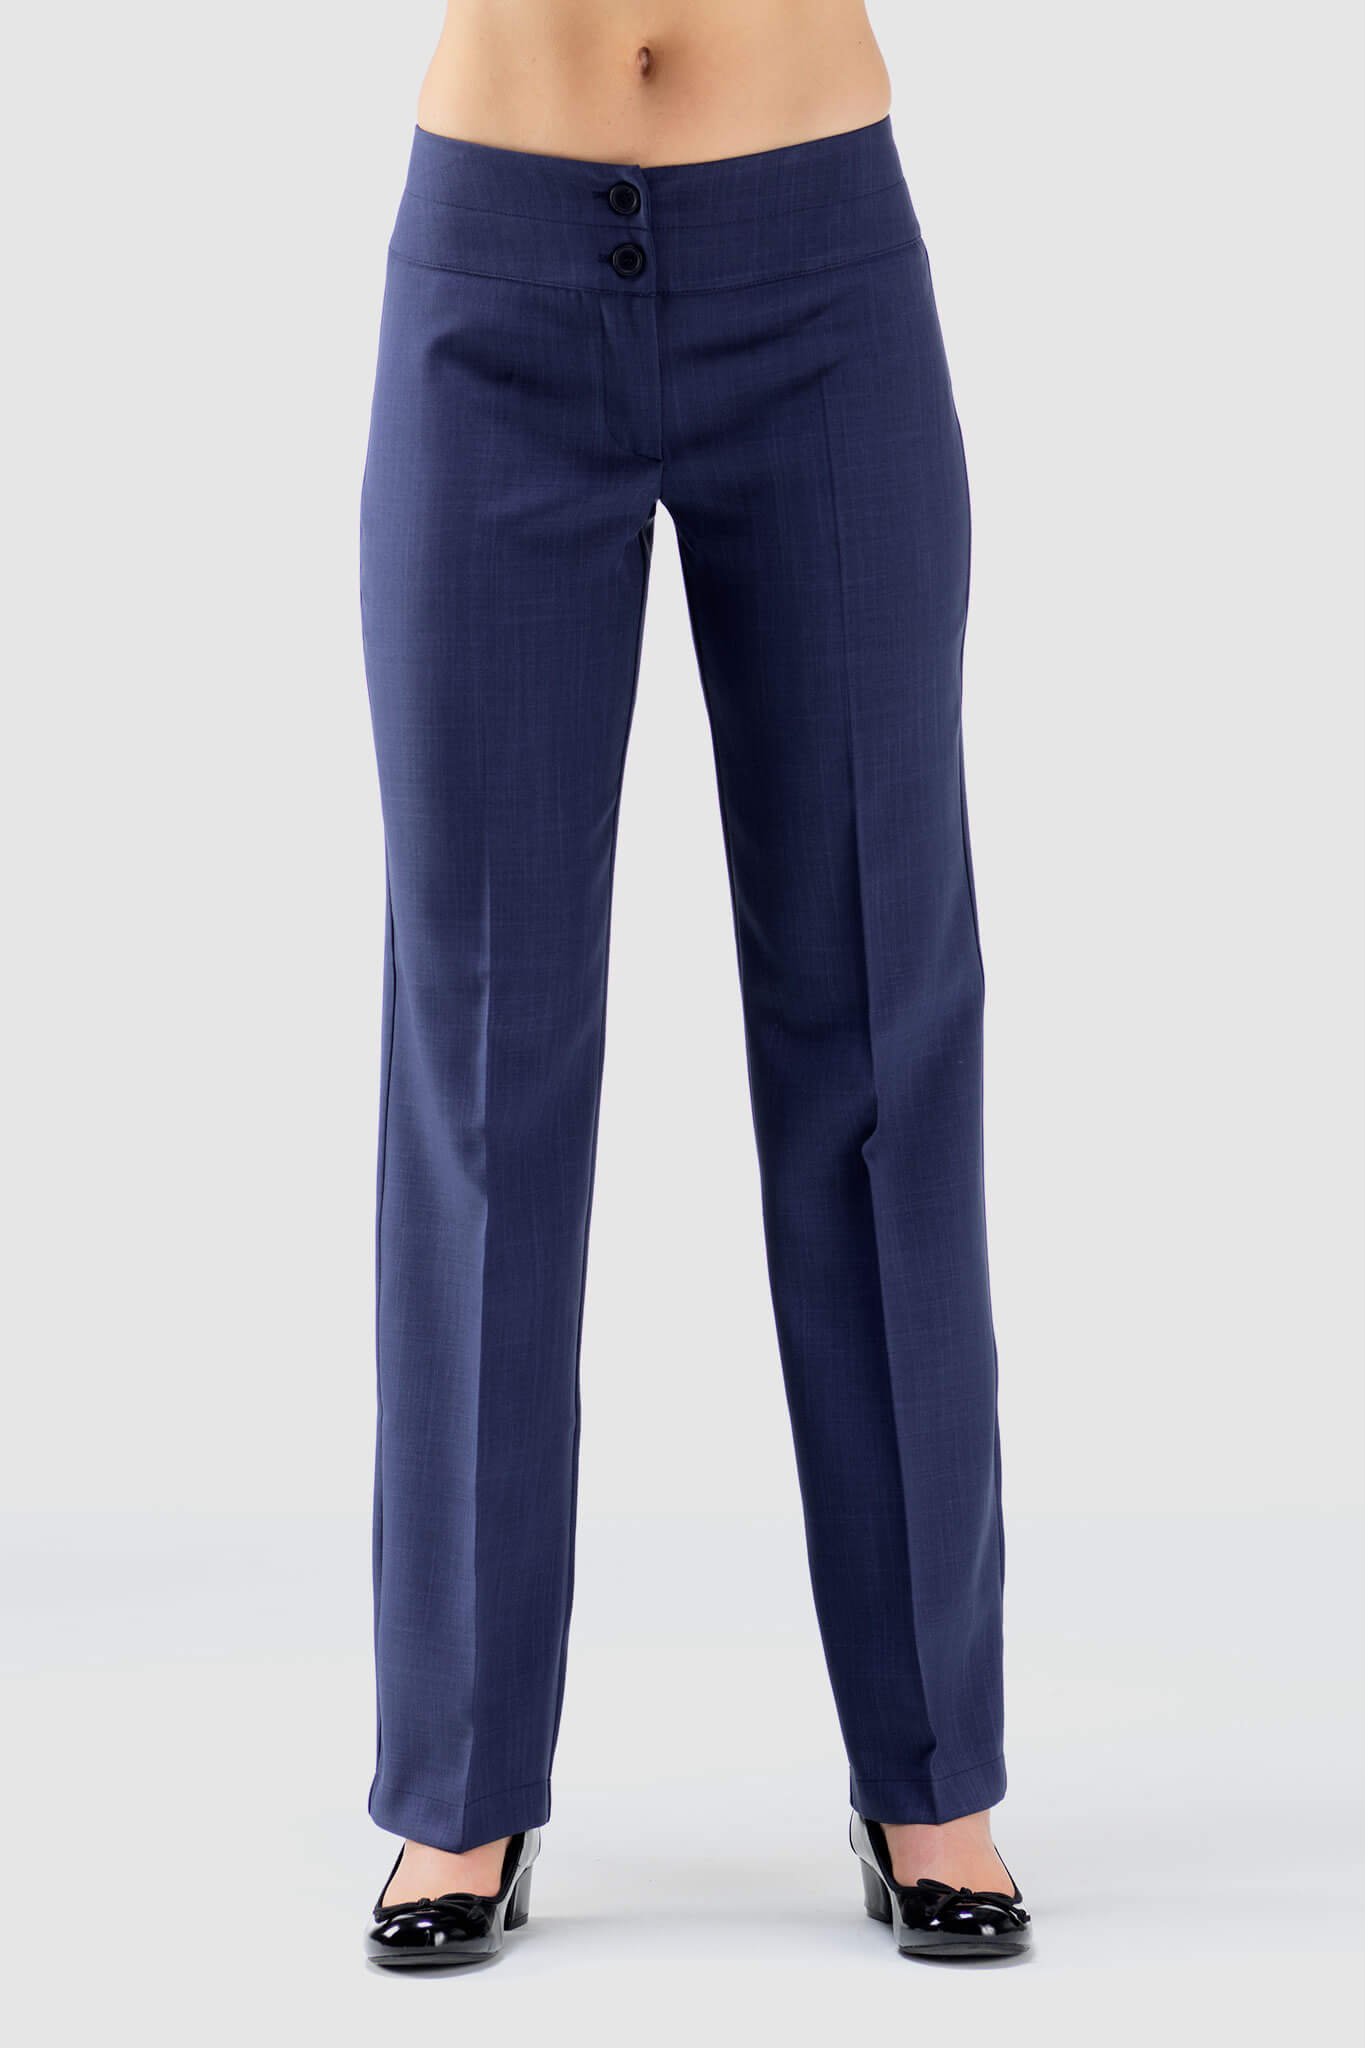 Parallel Leg Trouser | 50 Years' Experience - Florence Roby